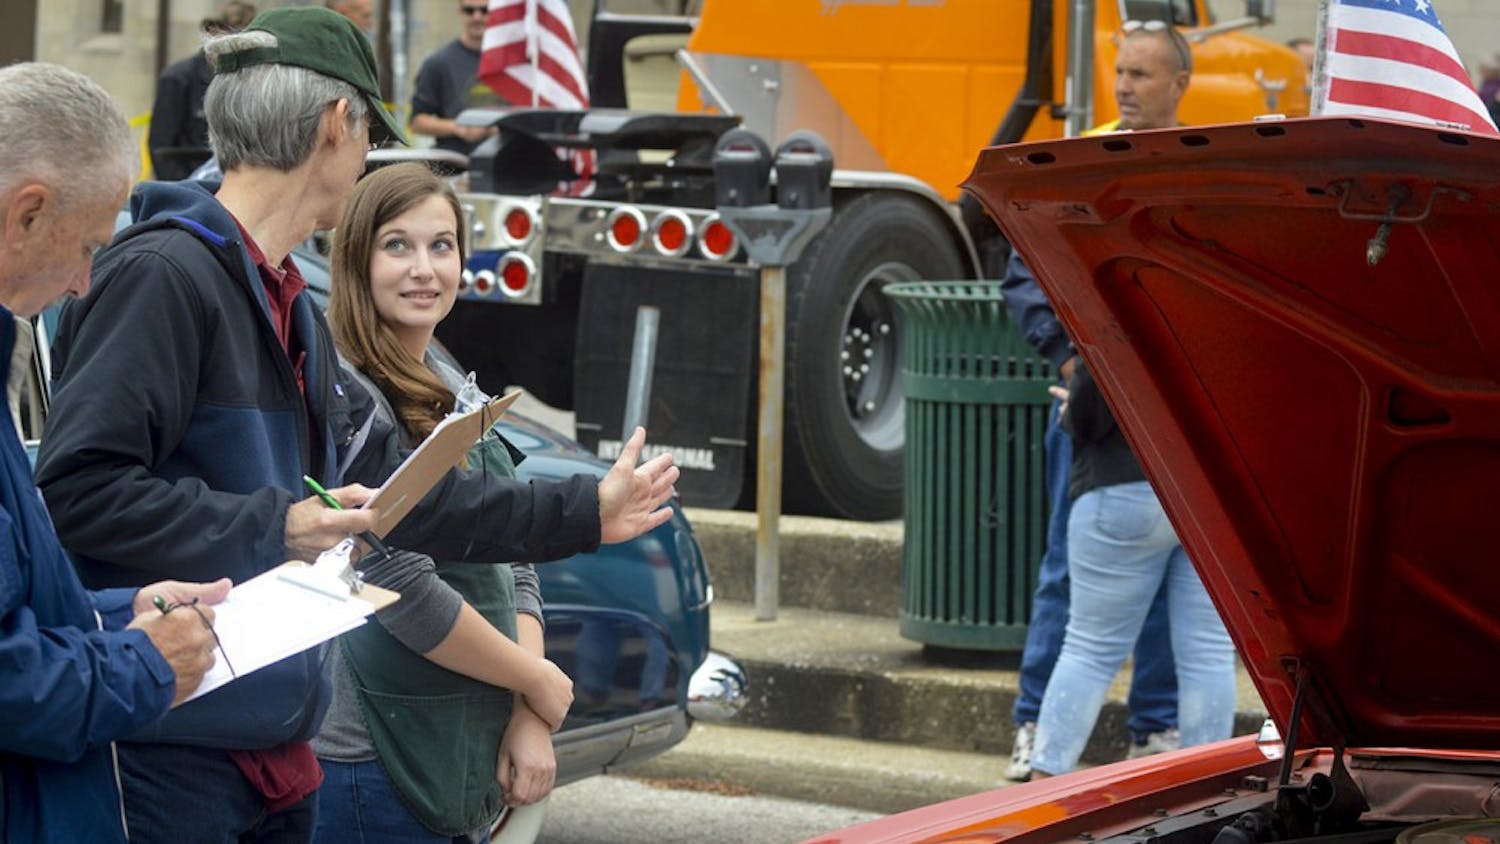 Judges rate tricked out classic vehicles during the 3rd Annual Classic Hot Rod Show Sunday afternoon outside of the Monroe County History Center. Competitors gained extra points based on presentation and décor items.